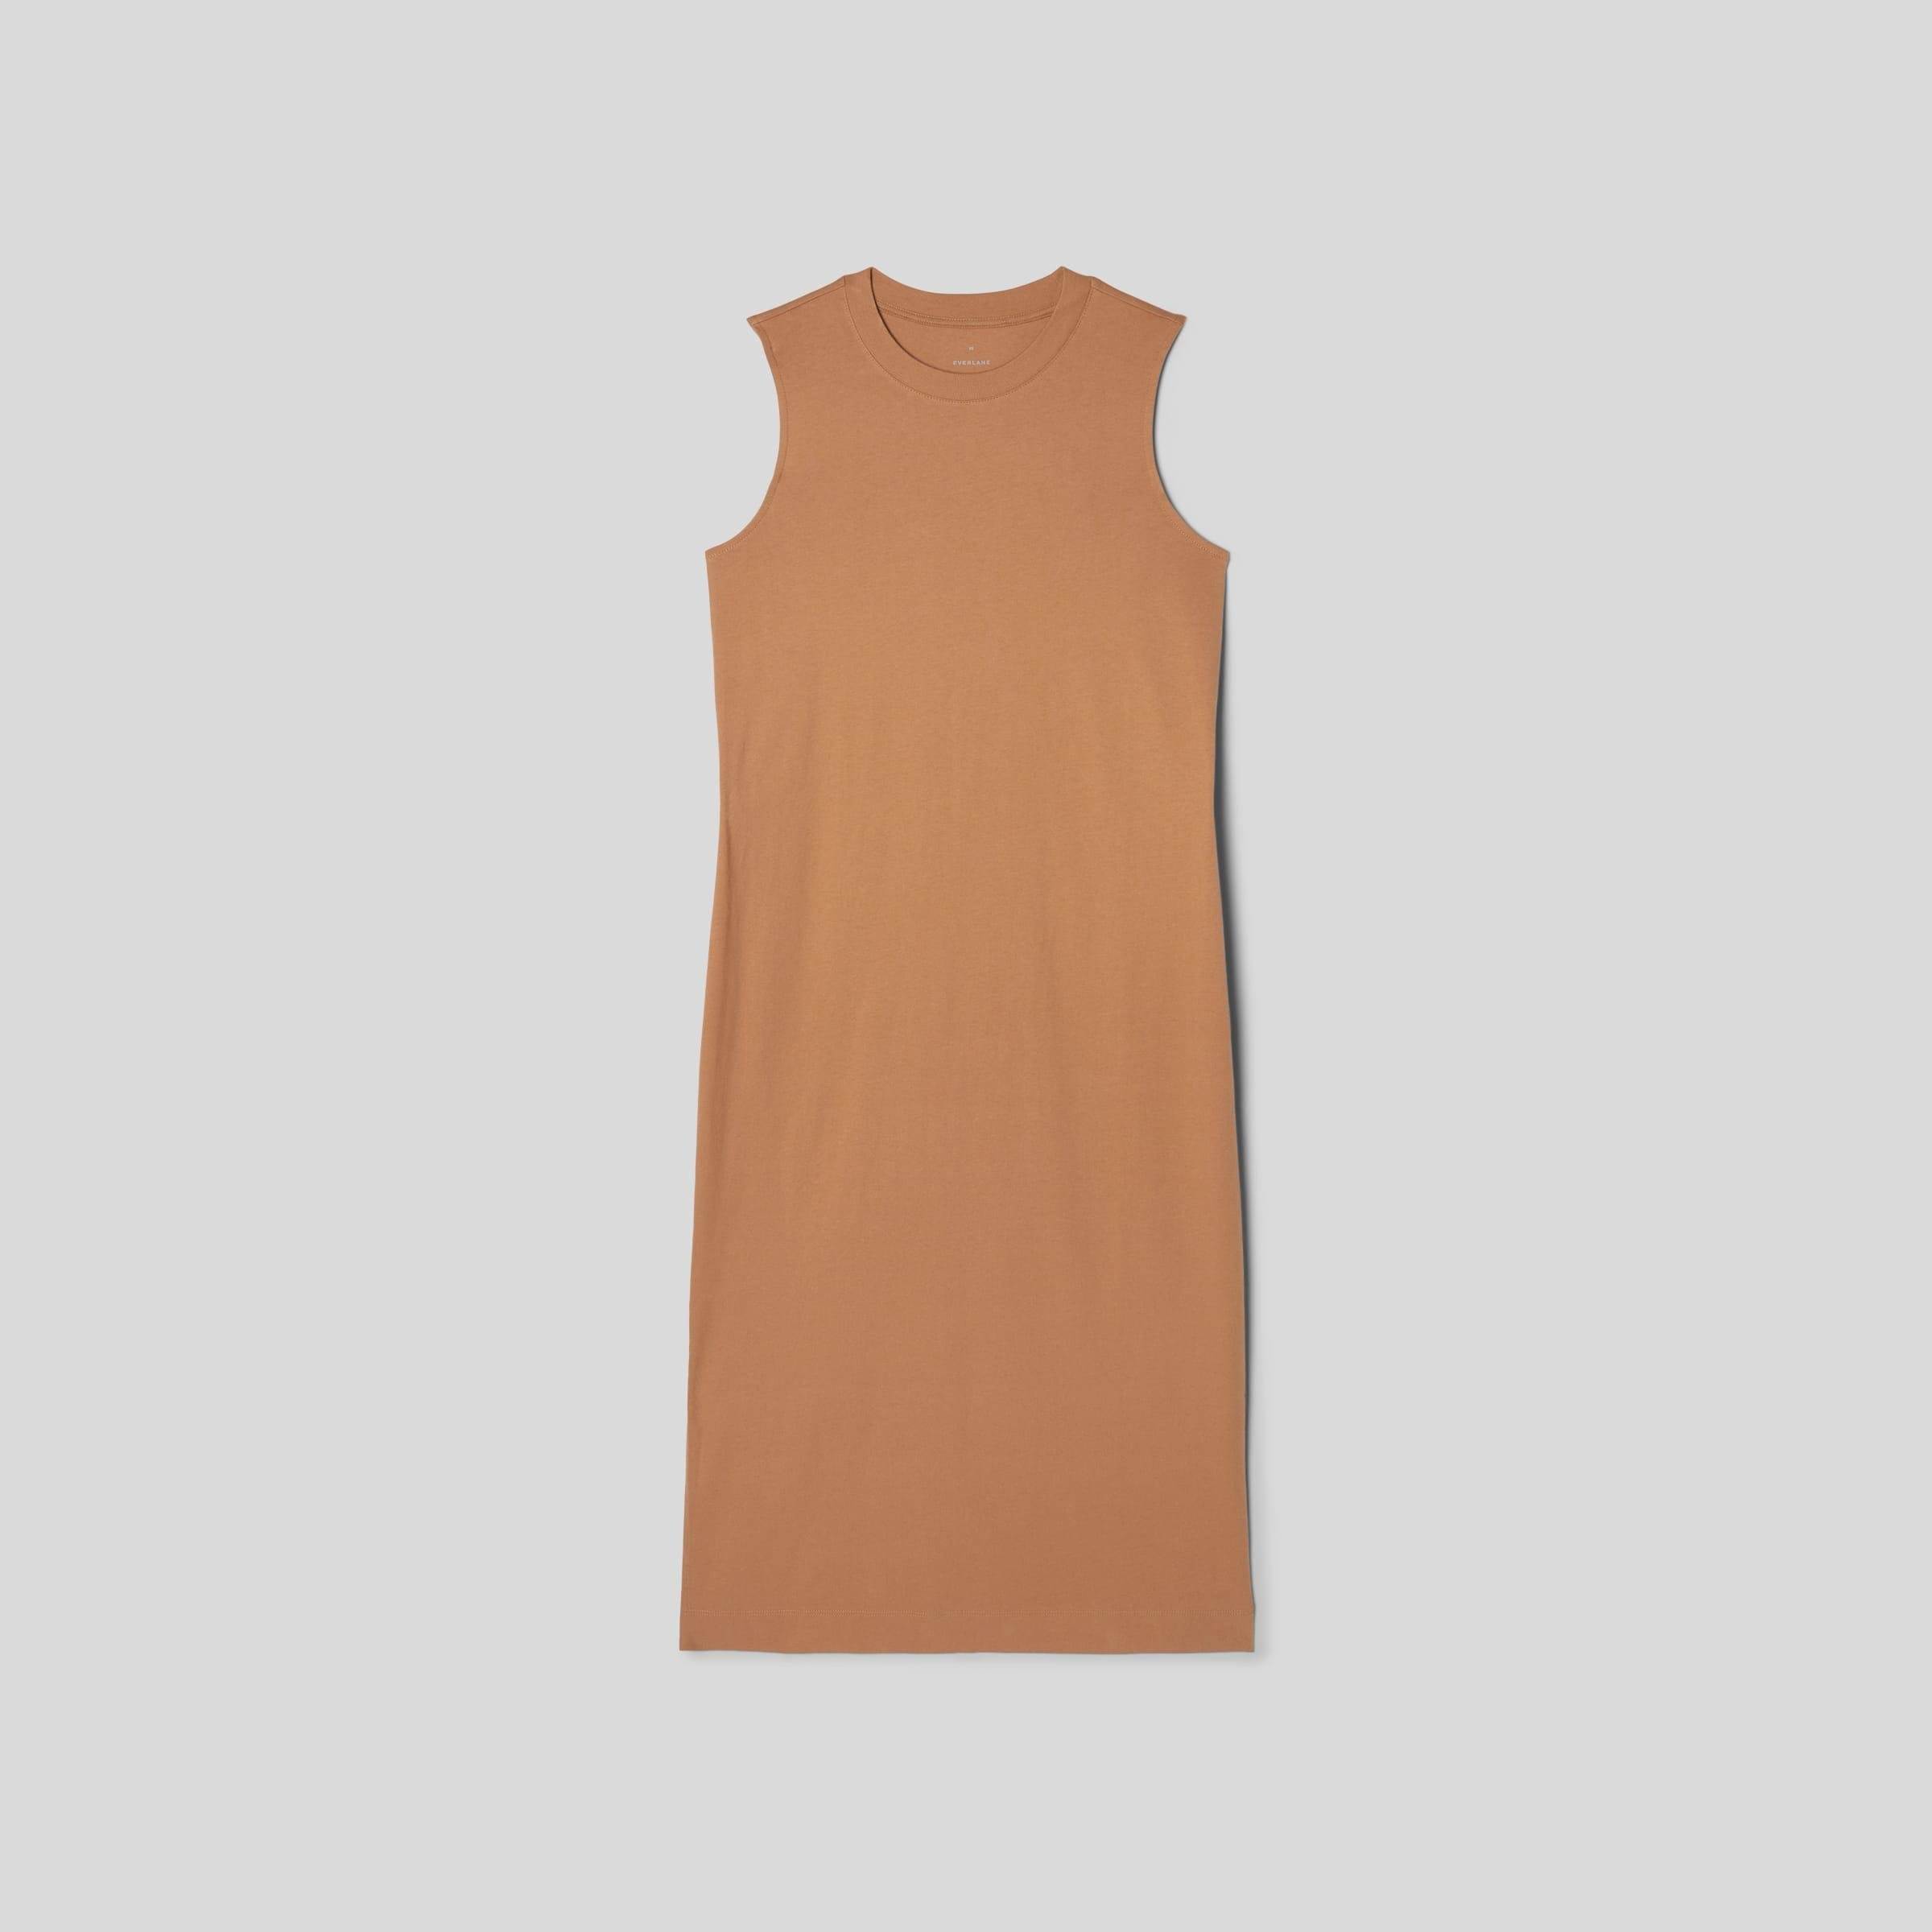 The Organic Cotton Weekend Tank Dress by EVERLANE